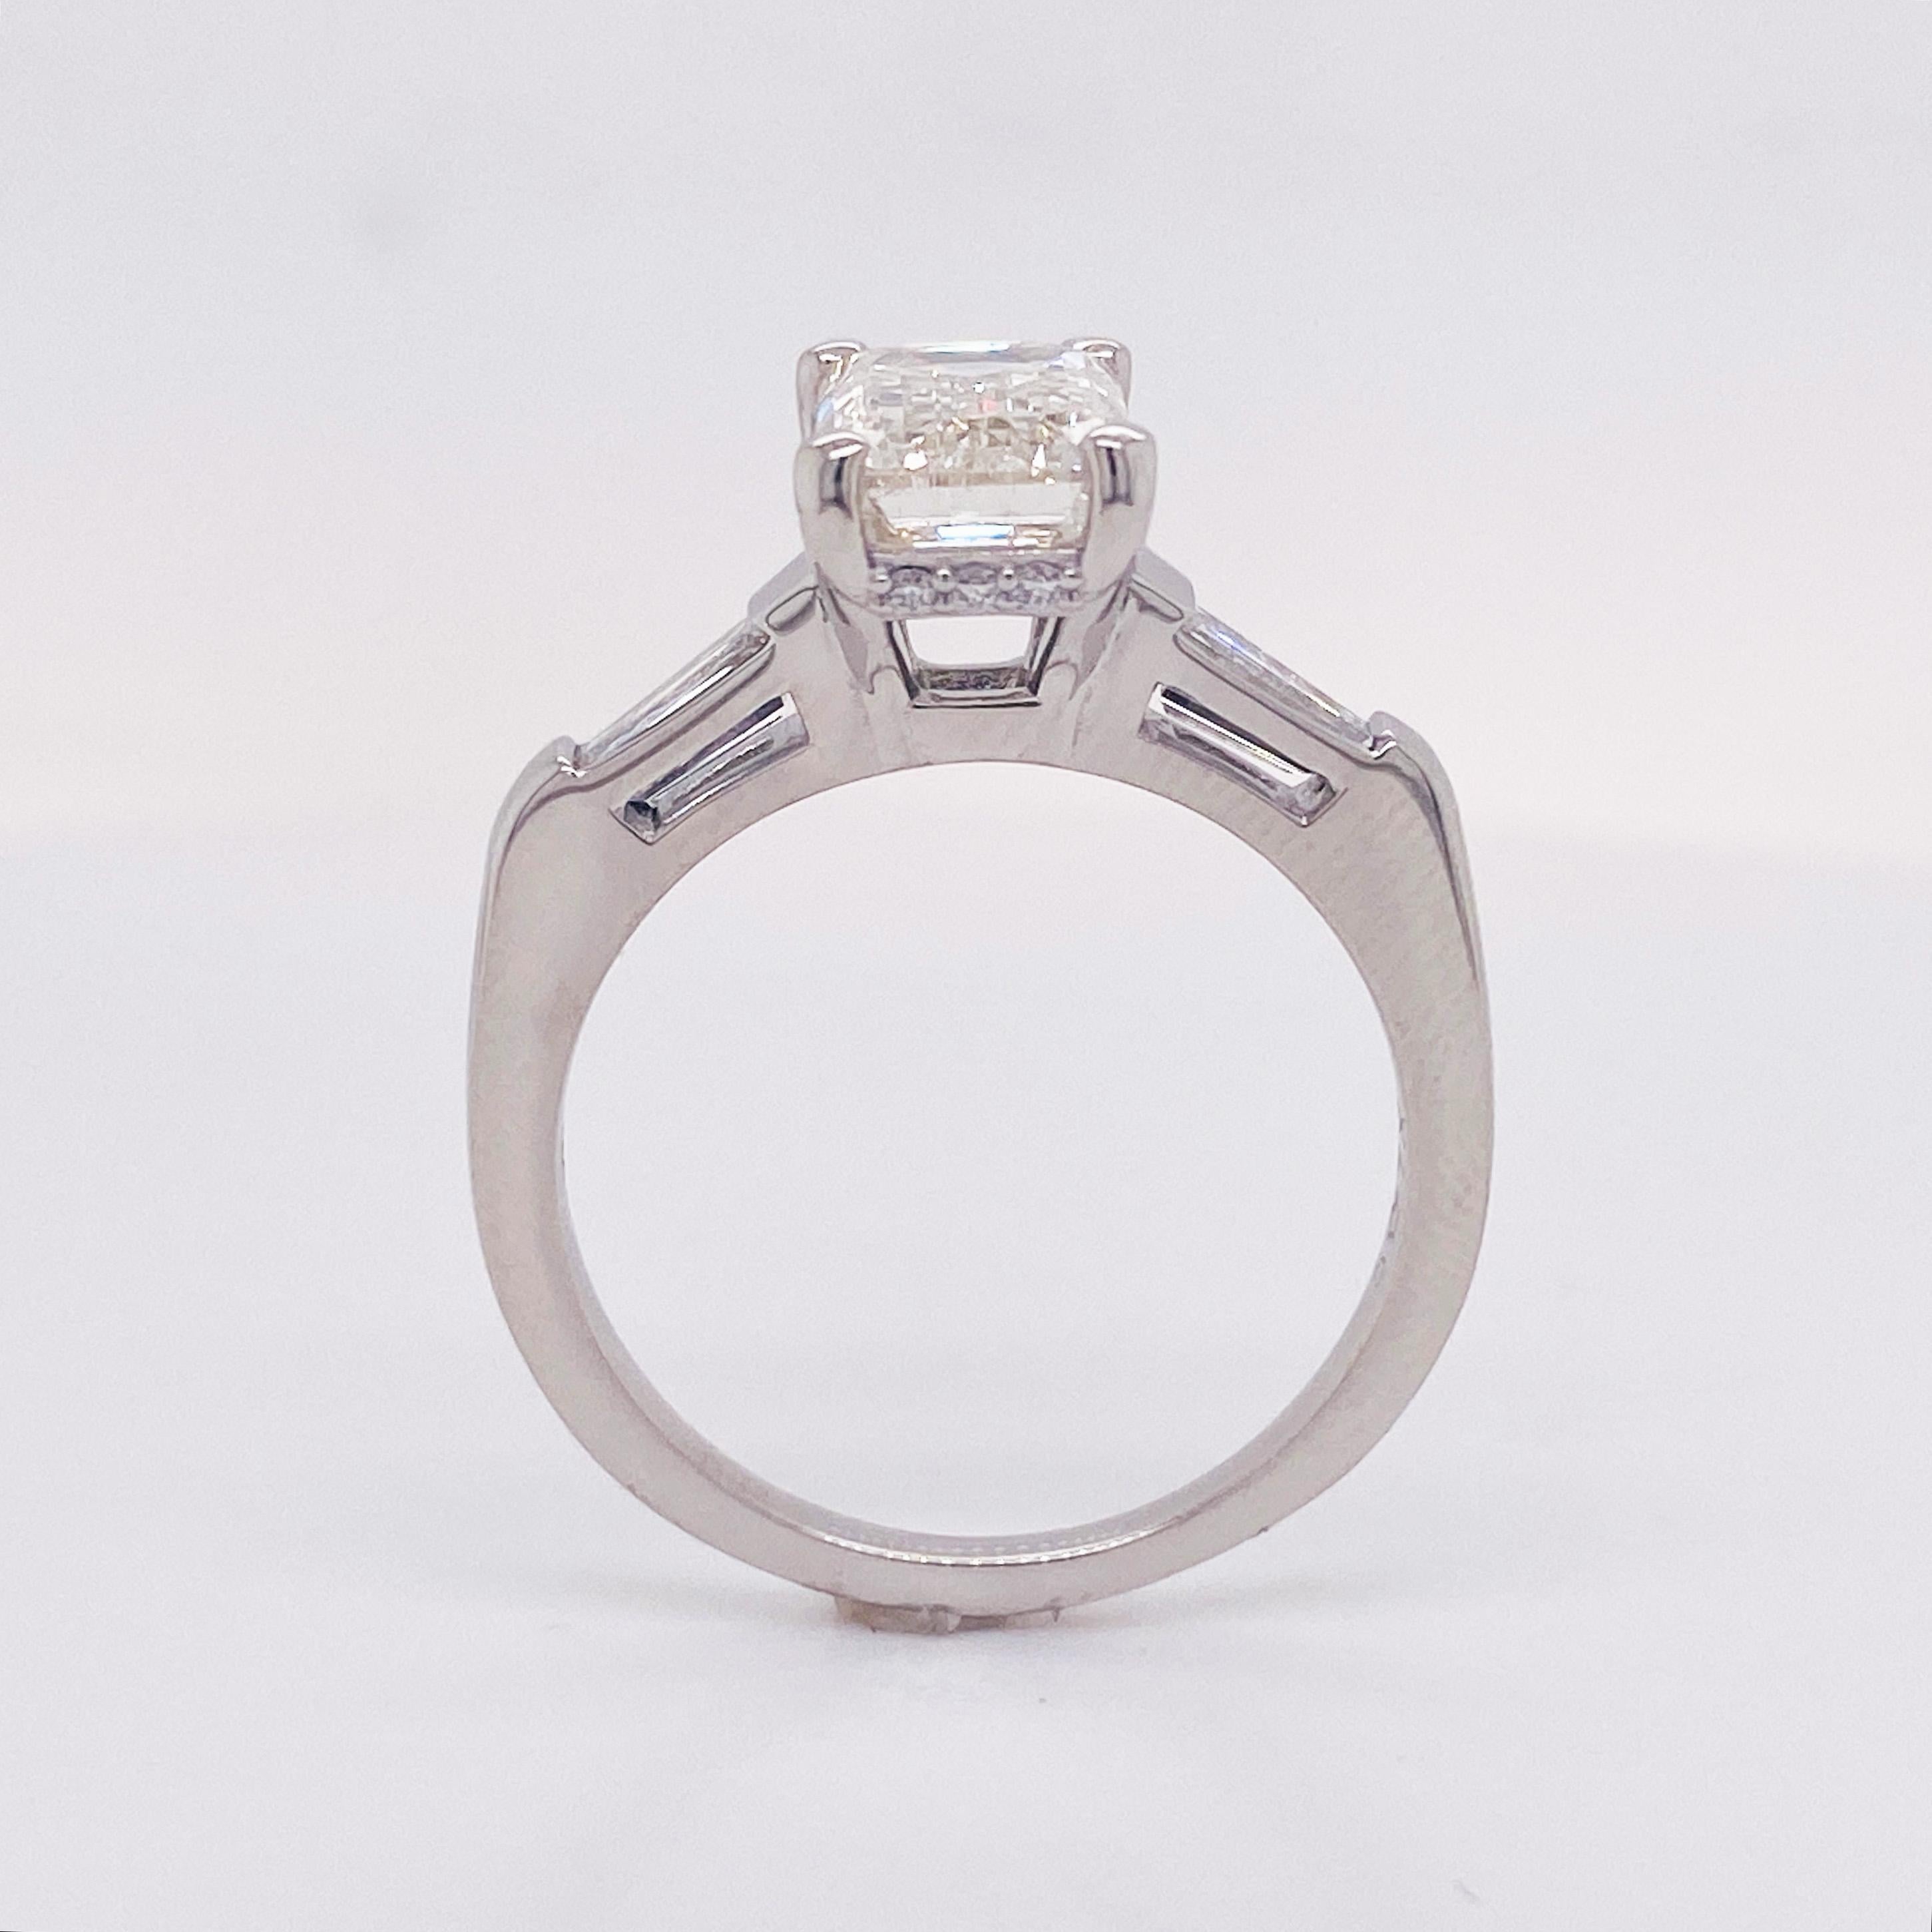 For Sale:  Emerald Cut Diamond Platinum Ring 2.50 Carats Flanked with Baguette Dias Lv 5